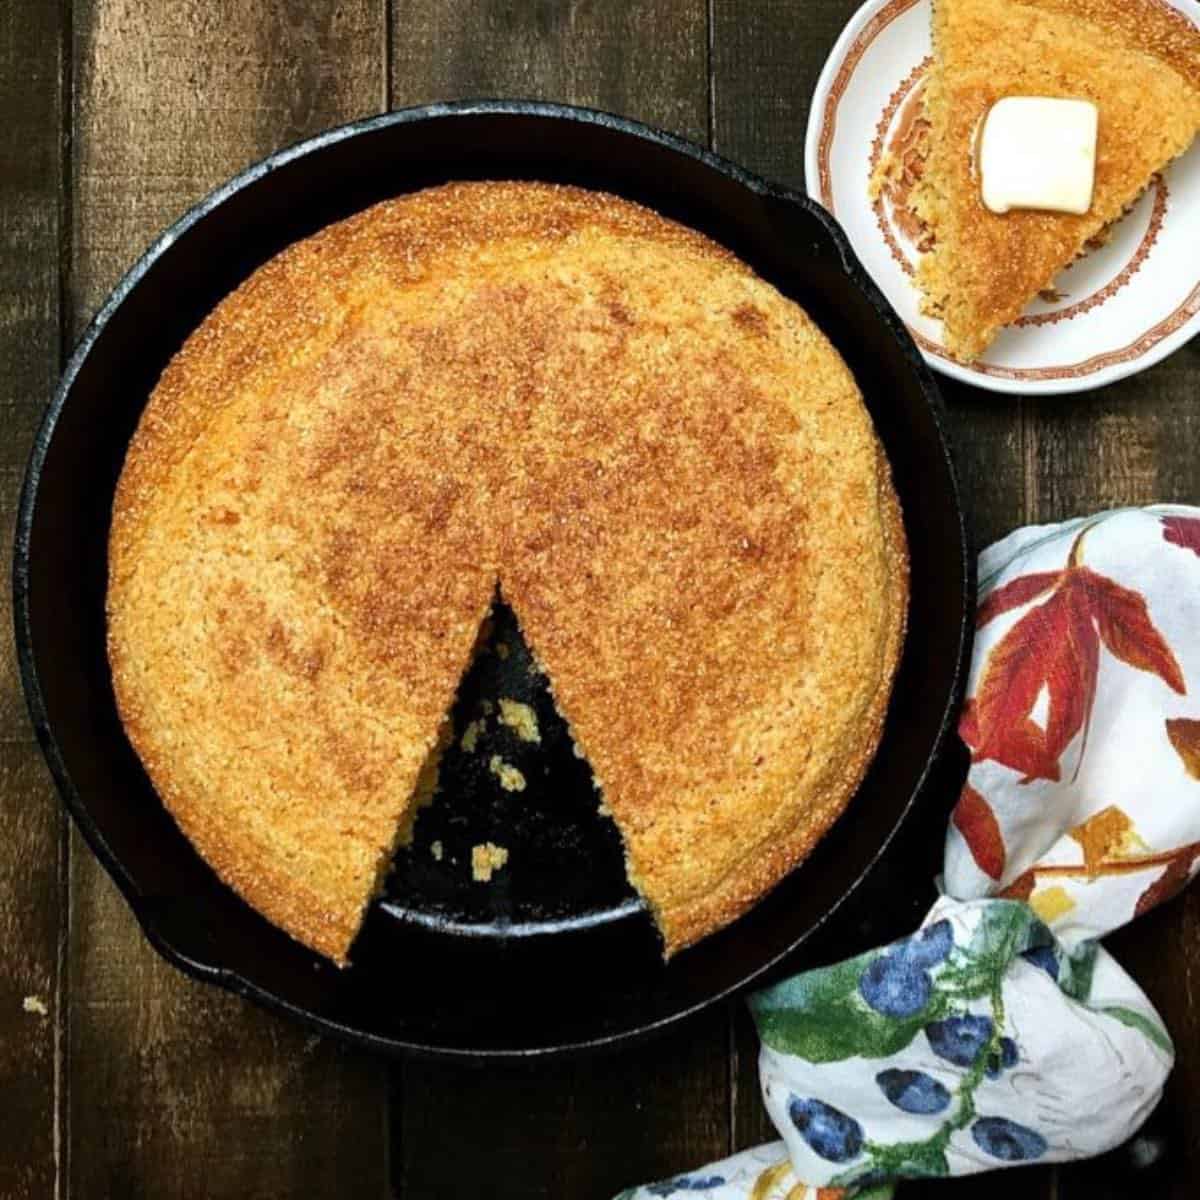 Cornbread in a cast iron skillet with a slice cut out.